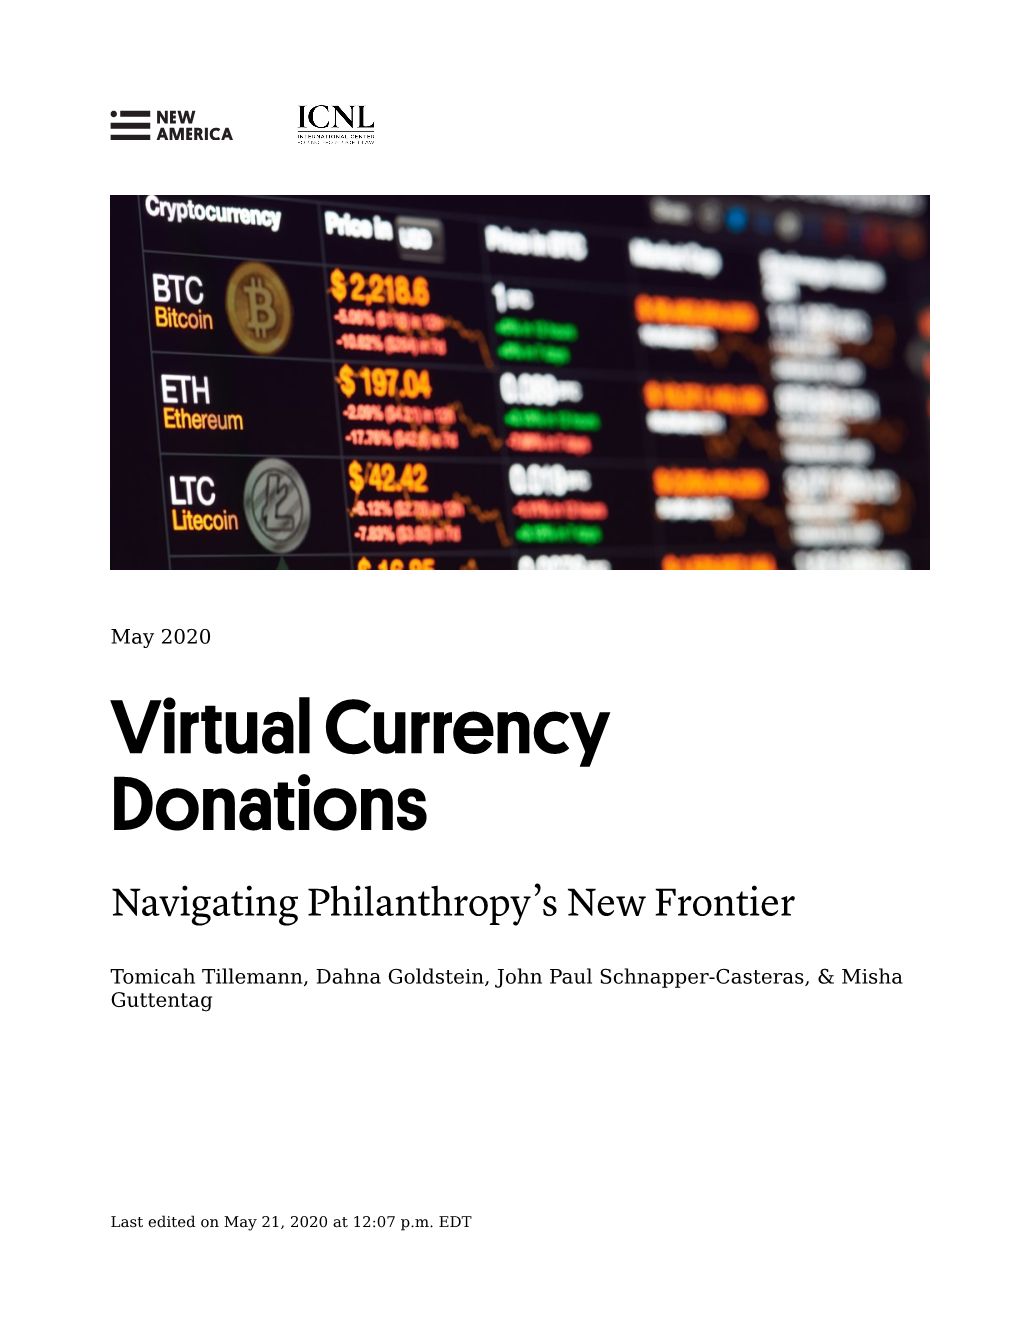 Virtual Currency Donations